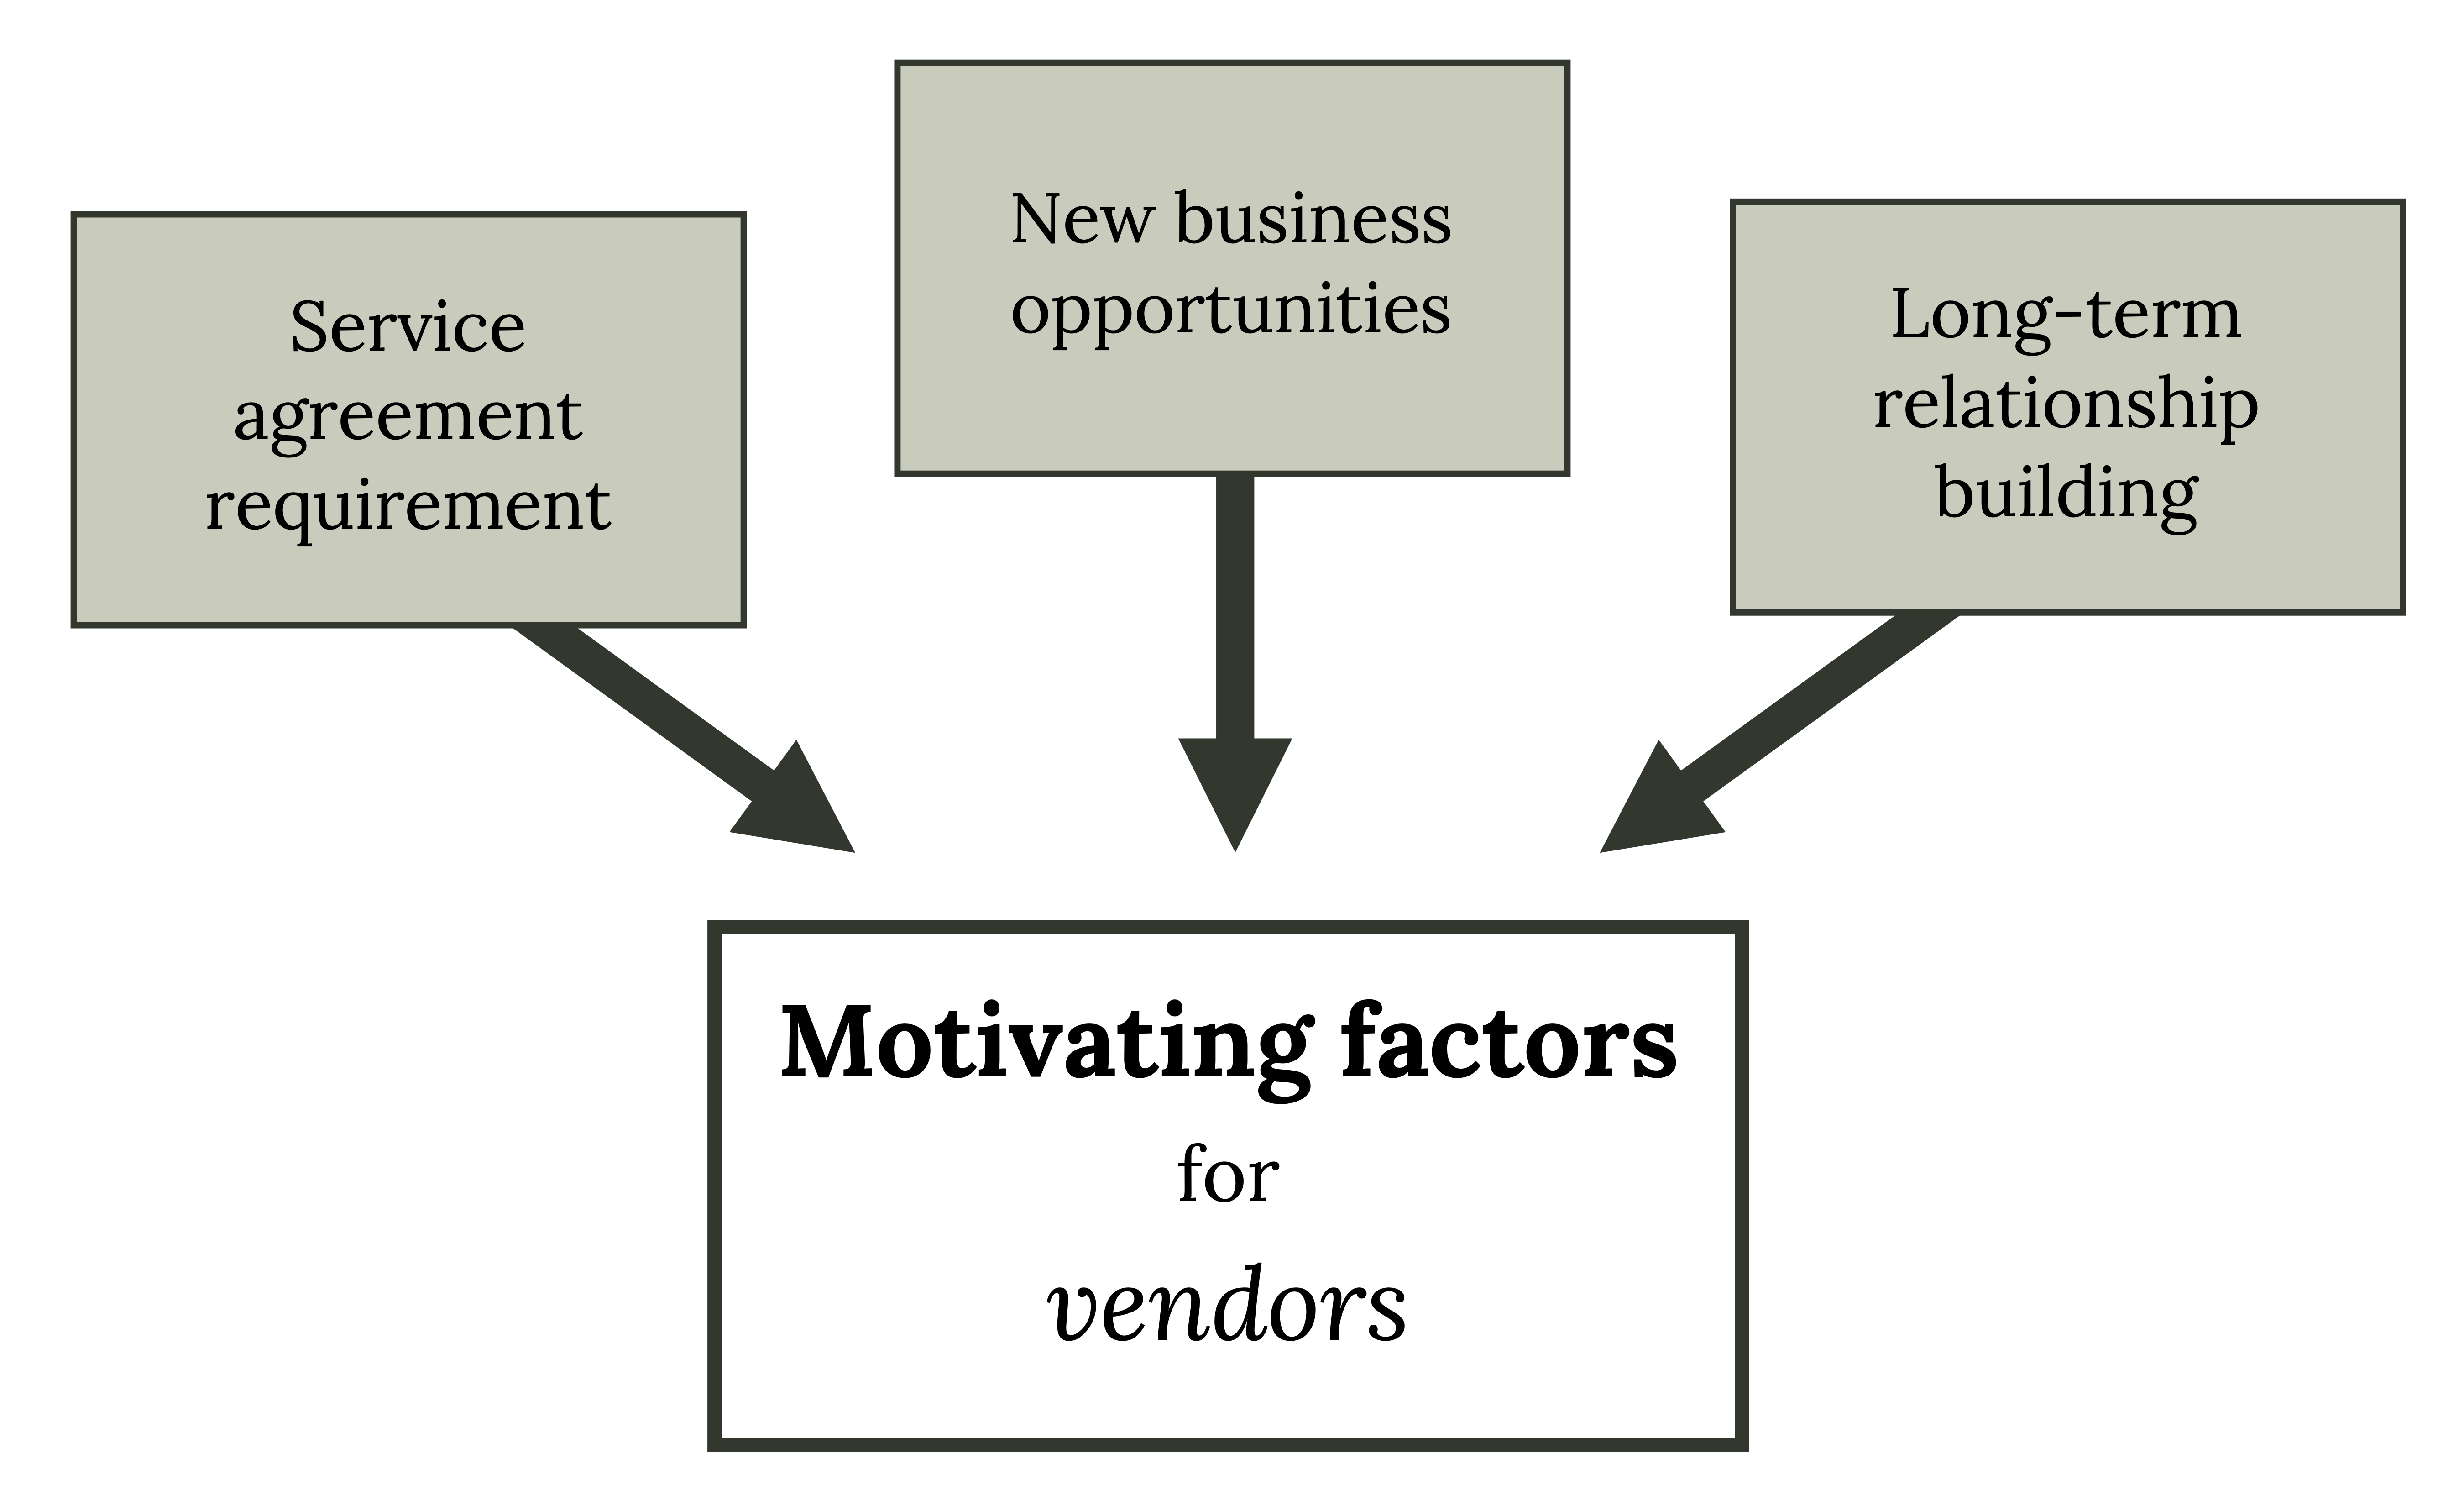 Motivating factors for vendors: service agreement requirement, new business opportunities, long-term relationship building.